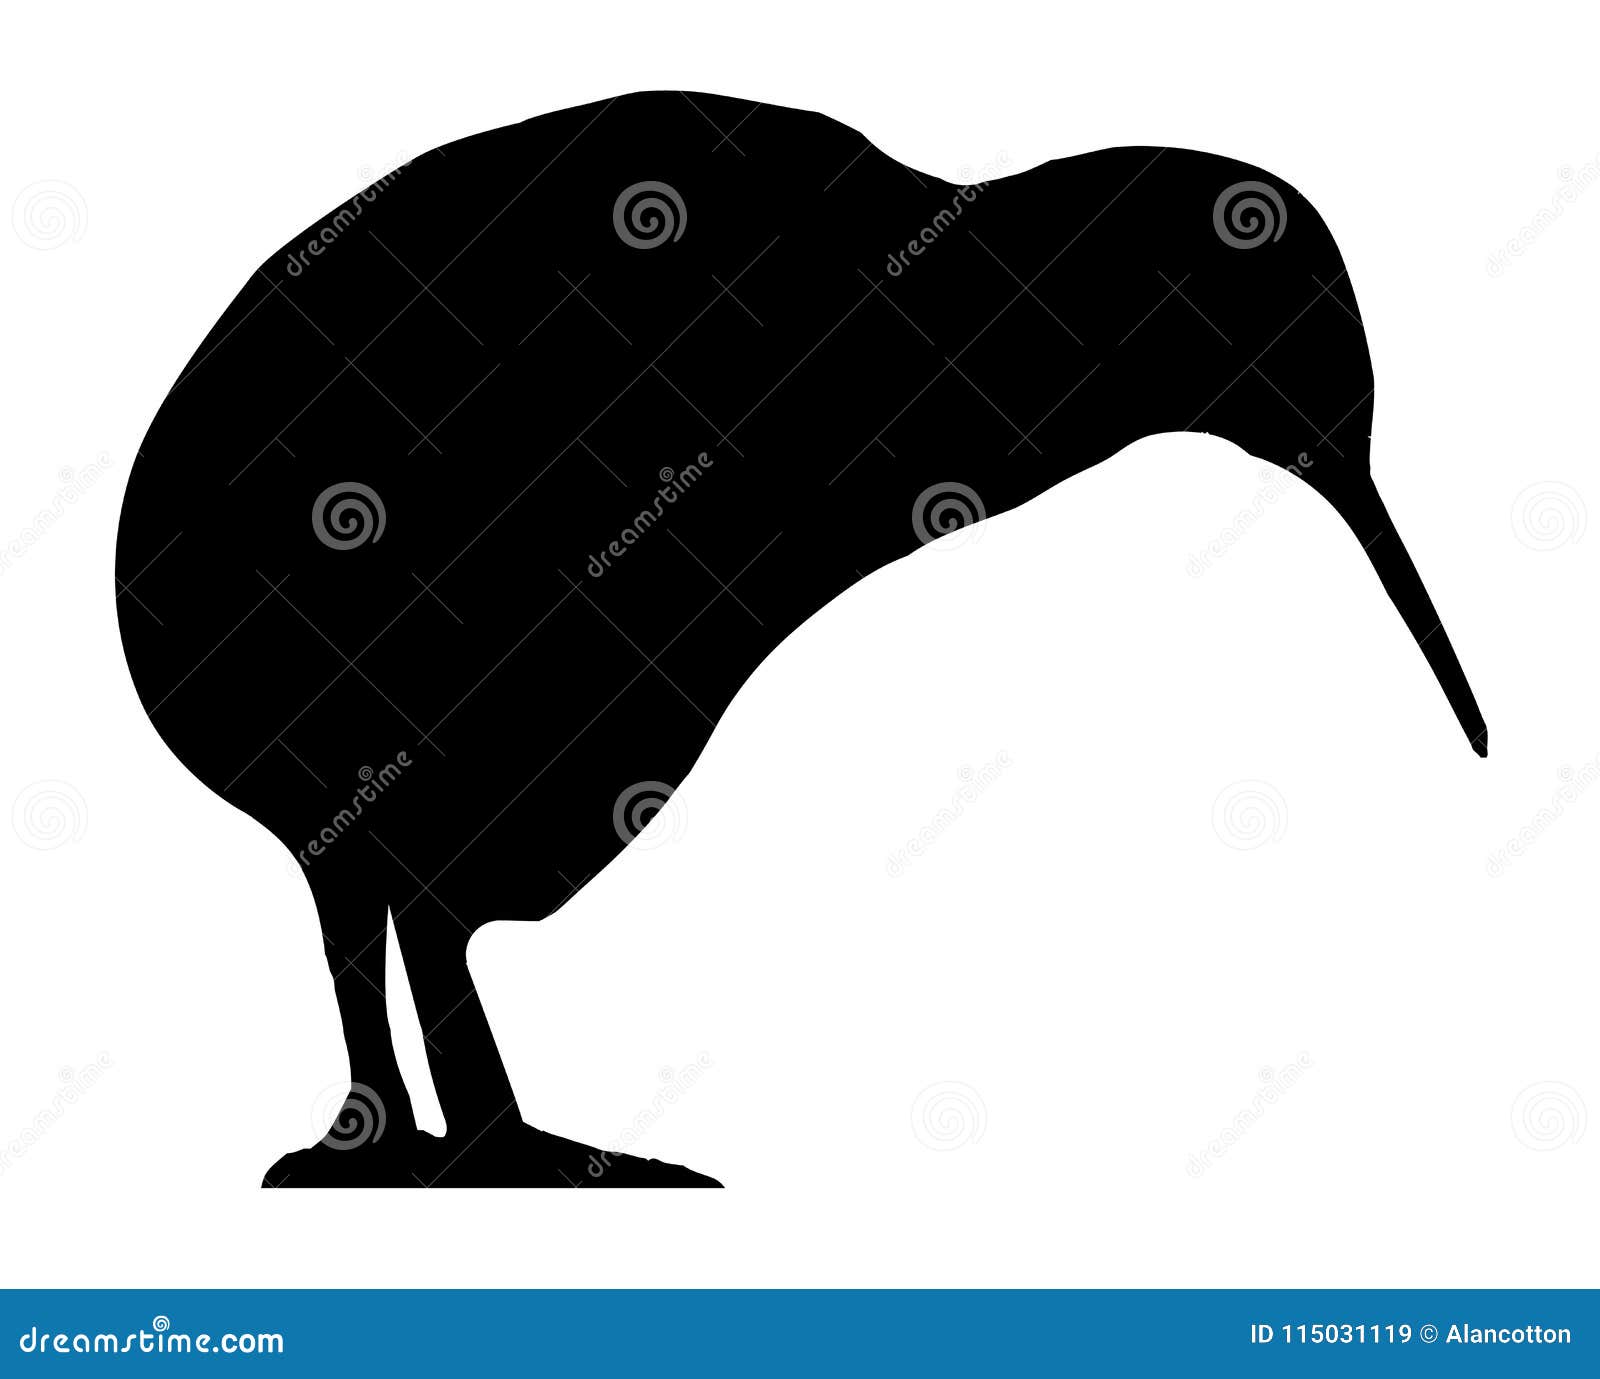 New Zealand Icon Kiwi Silhouette Stock Vector - Illustration of sign,  outline: 115031119